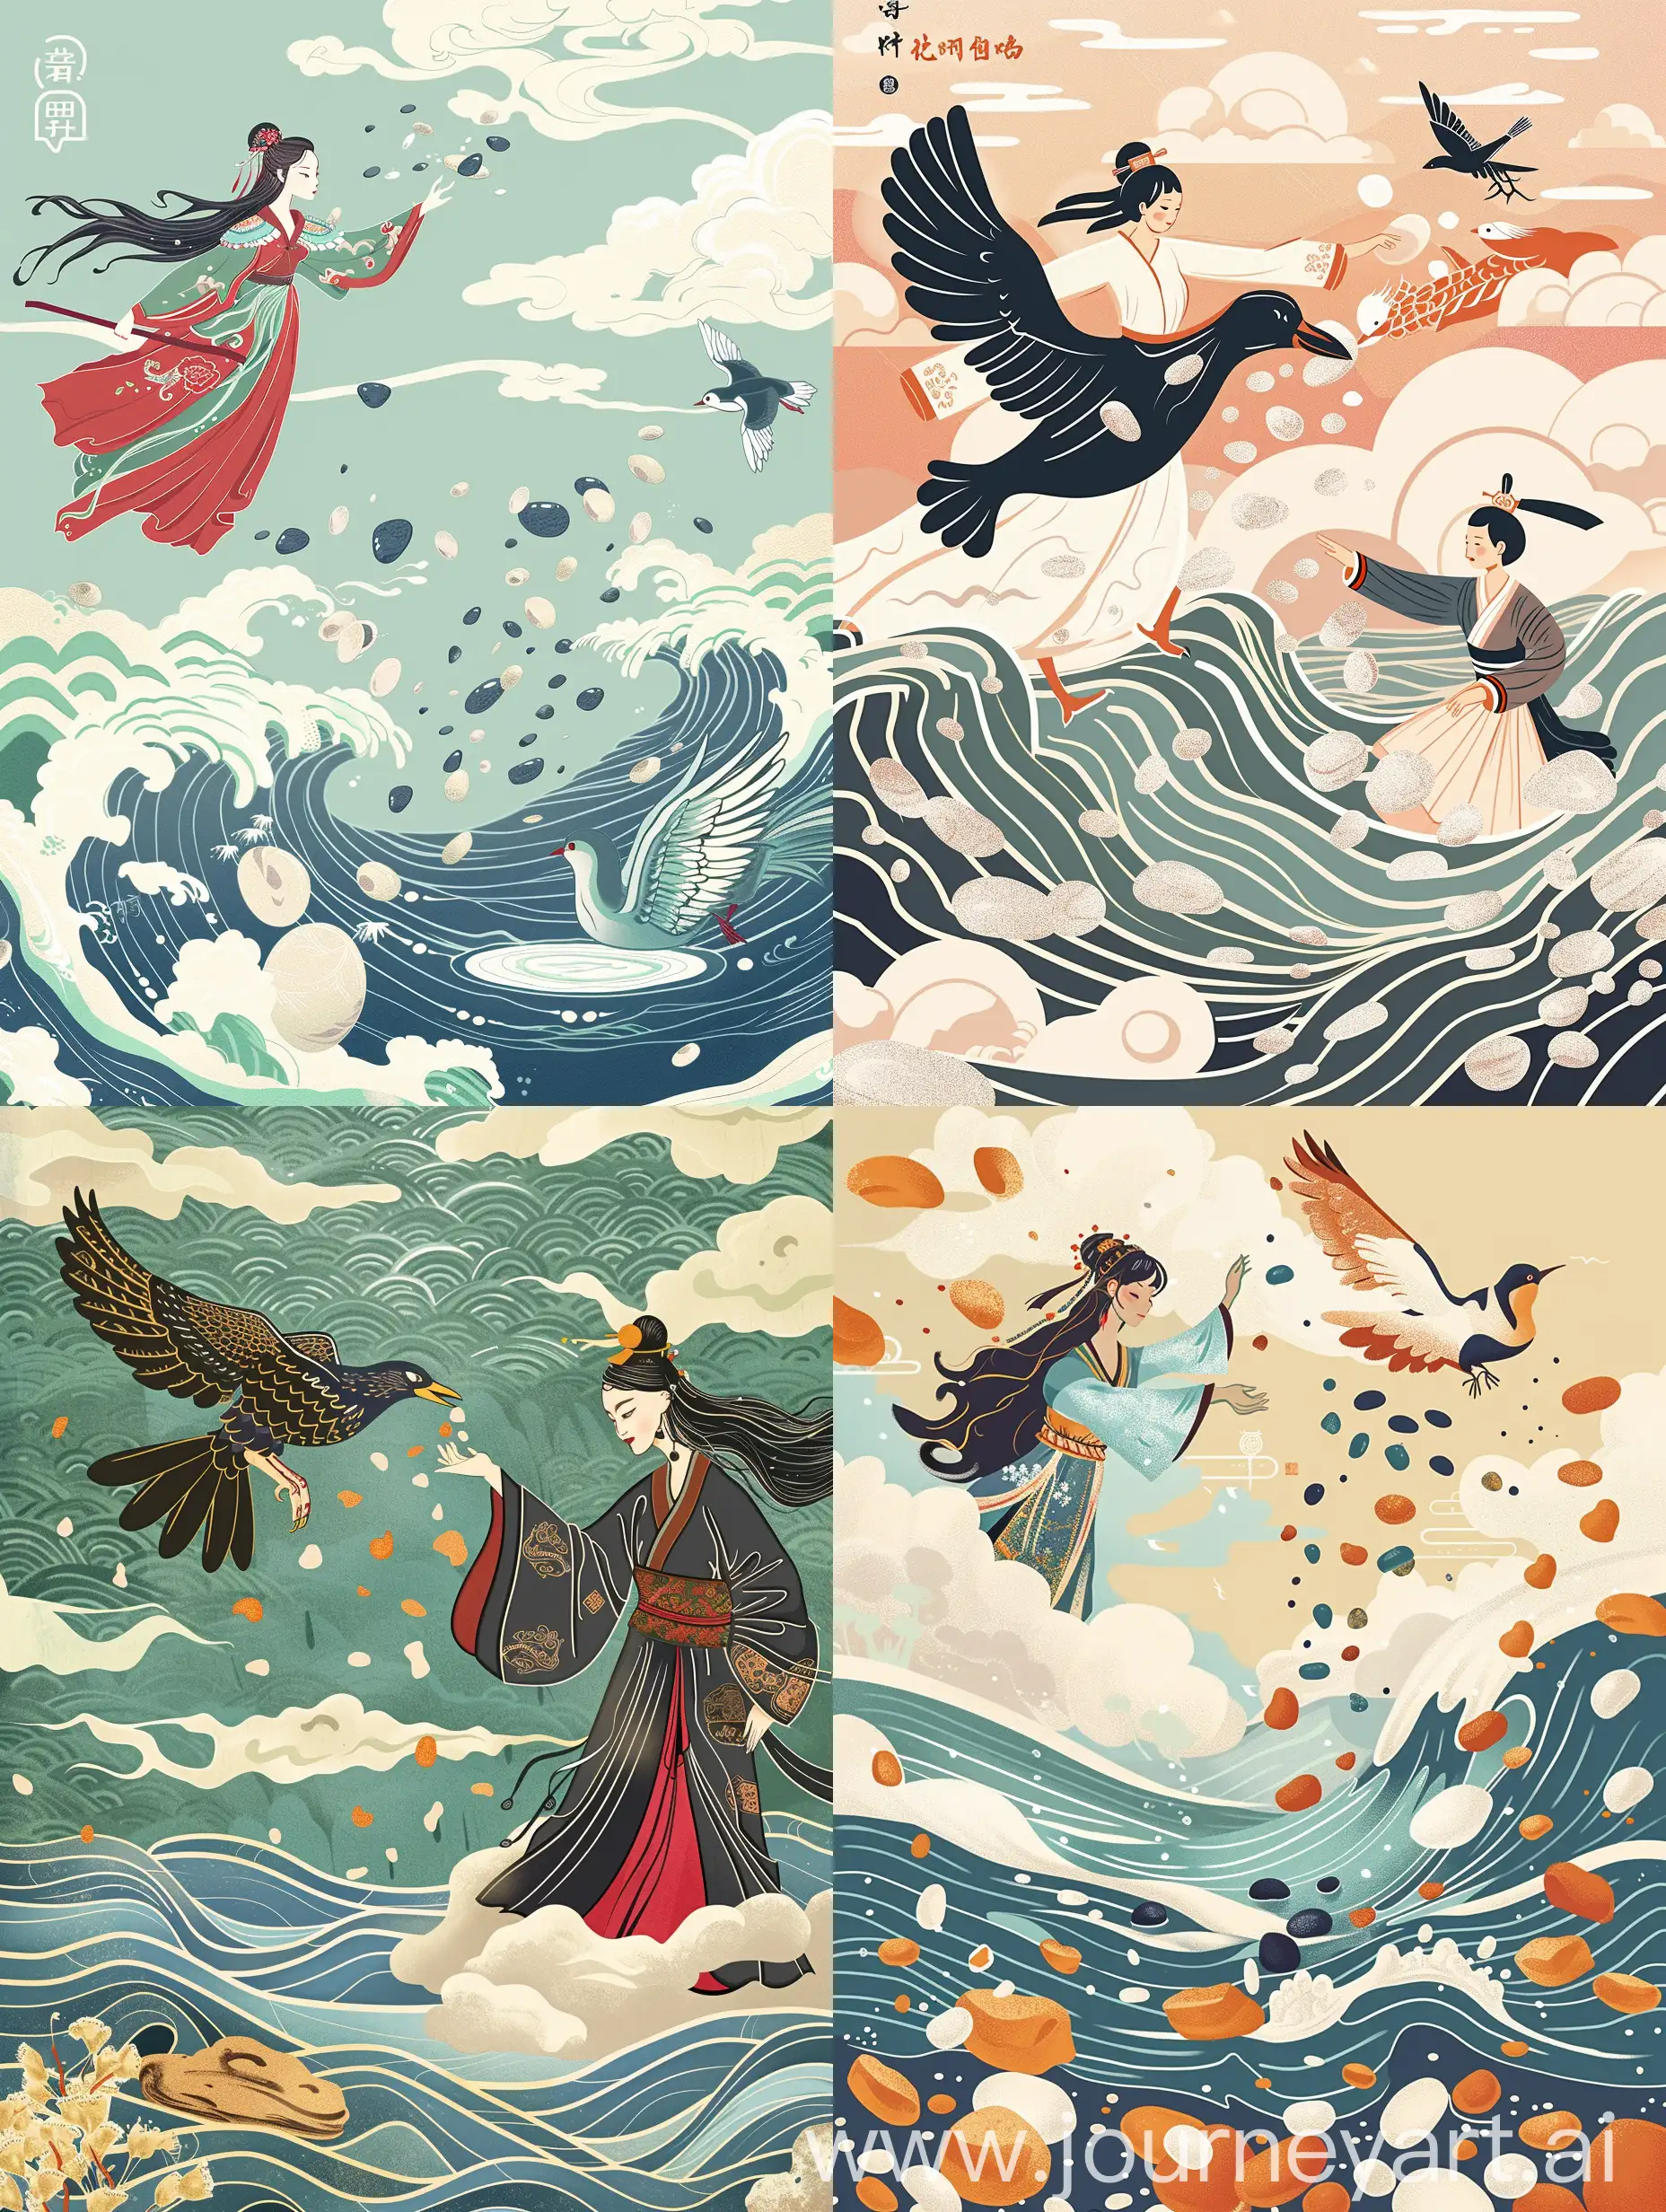 In the style of hieu, a flat illustration in a poster design, employing rock colors, traditional Chinese figure motifs from ink painting, murals, flying heavenly maiden, the mythical bird jingwei trying to fill up the sea with pebbles, Chinese ancient myth, Bird, sea, stone, auspicious clouds 